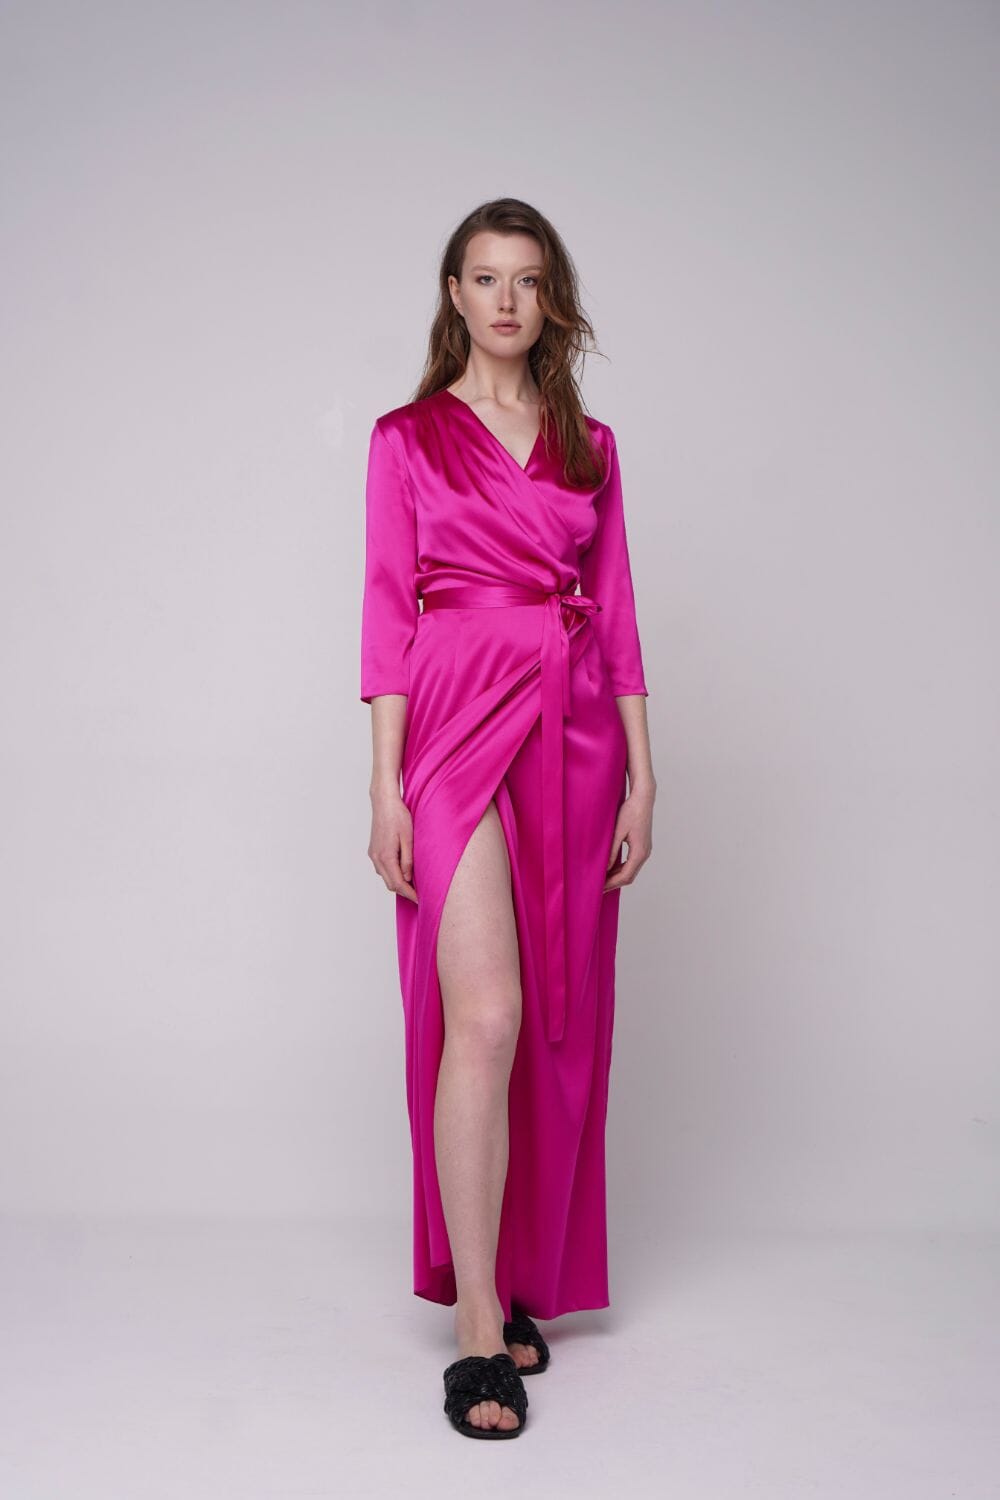  Let Your Love Silk Robe Product SIA Glamoralle